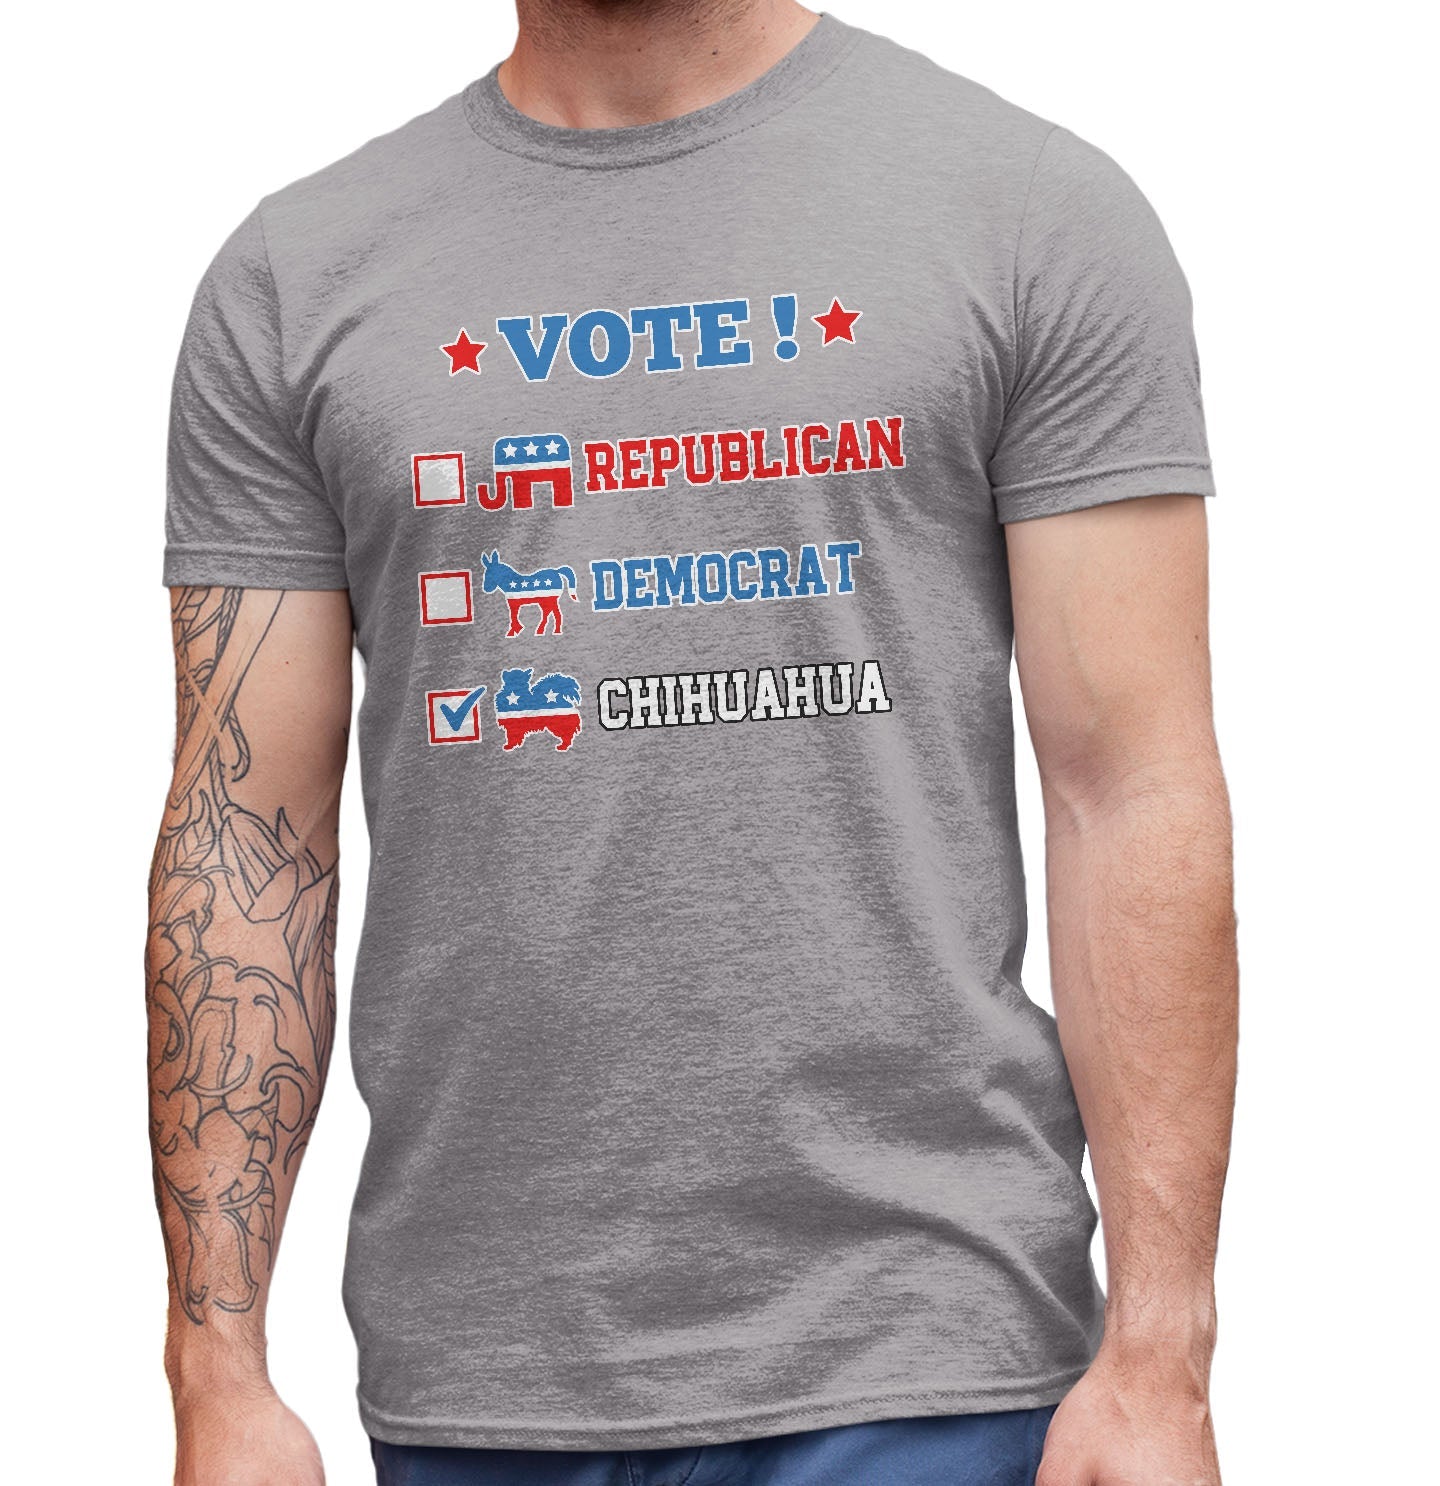 Vote for the Chihuahua (Long-Haired) - Adult Unisex T-Shirt